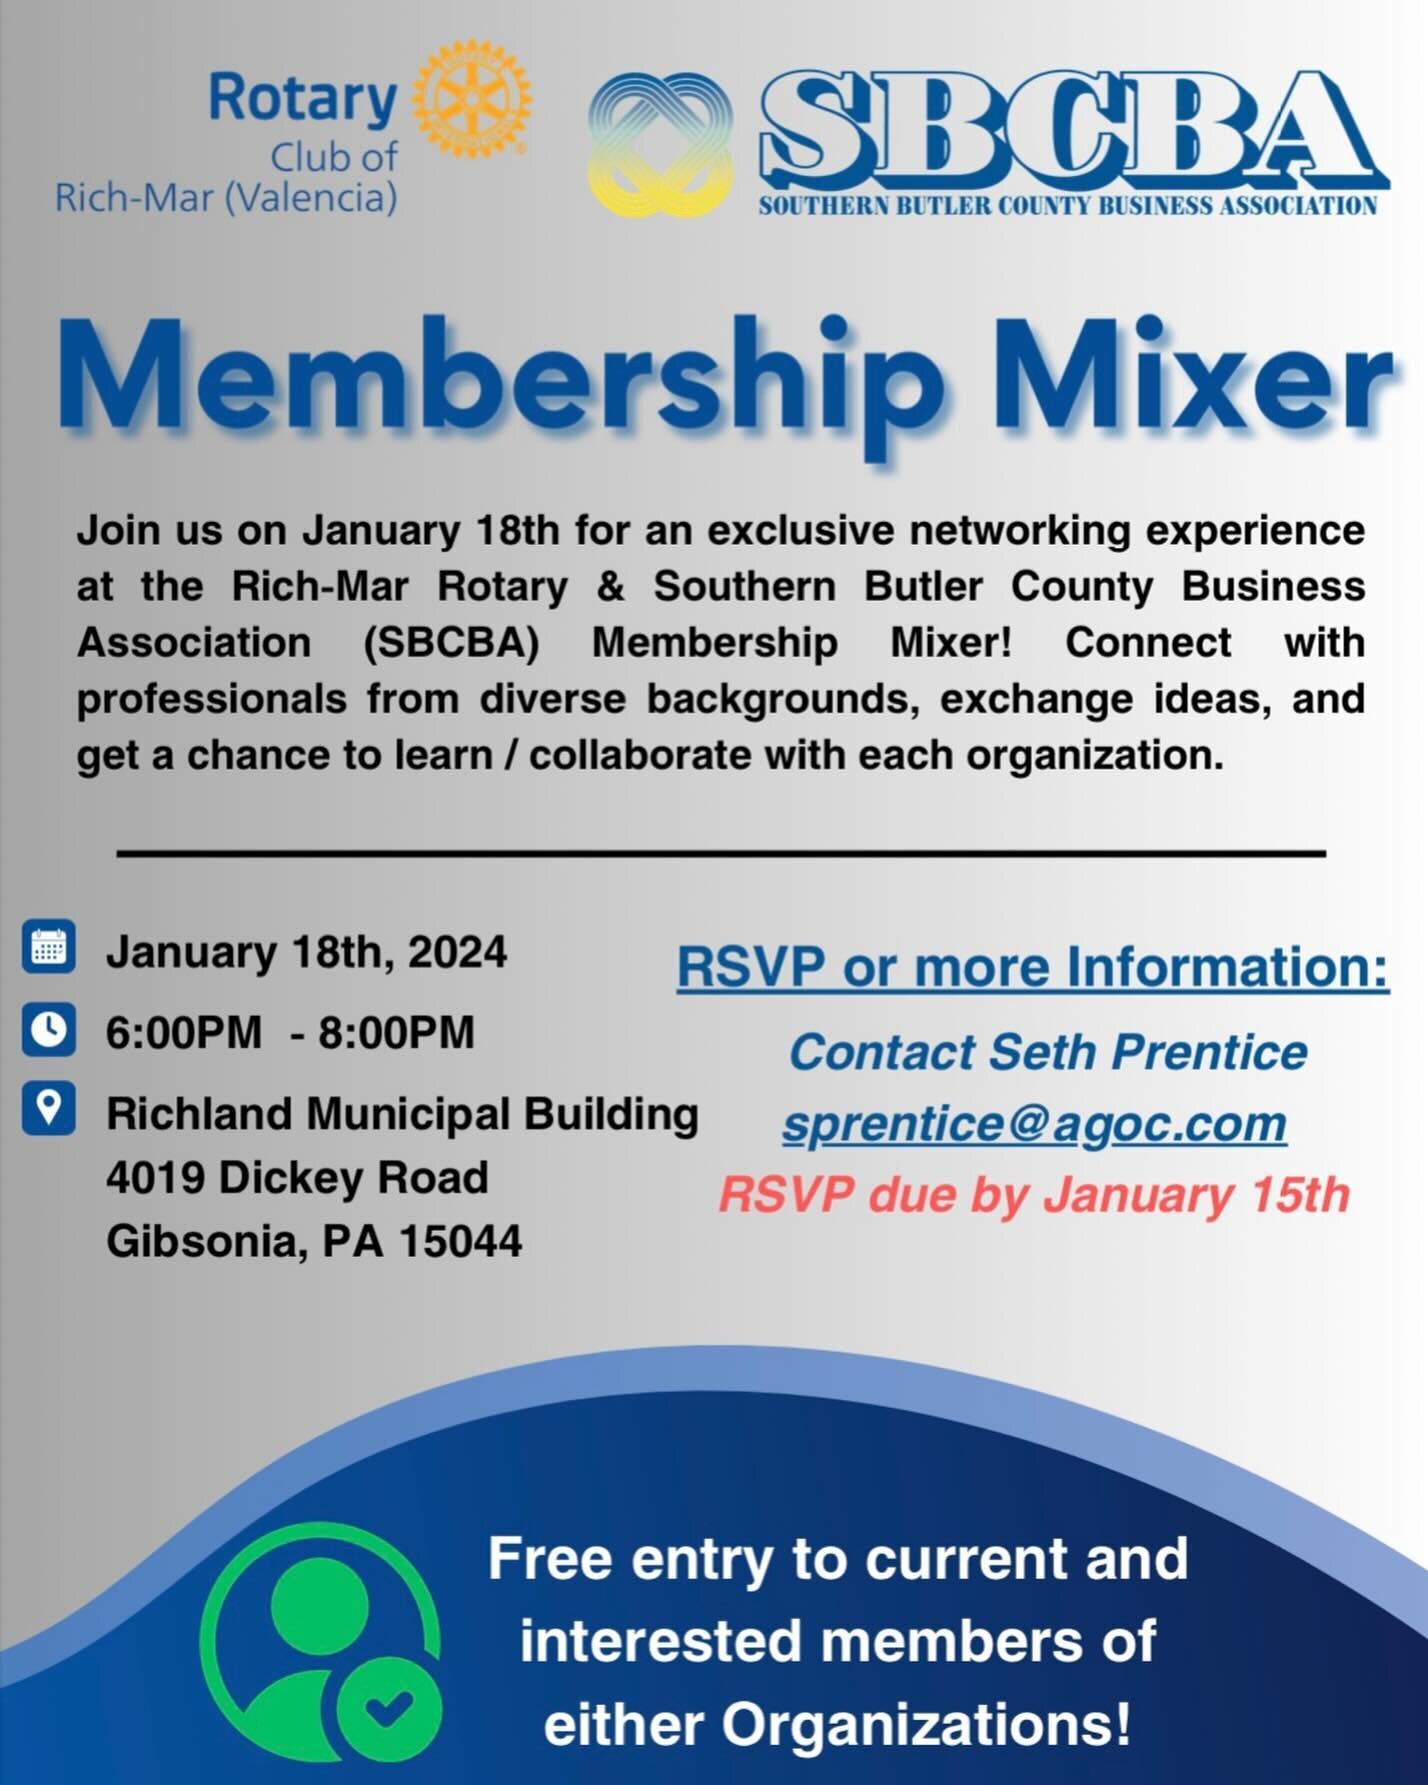 🌟 Save the date! 🗓️ Join us at the SBCBA/Rich-Mar Rotary Membership Mixer on January 18th from 6pm-8pm at the Richland Municipal Building. 🤝 Explore opportunities, connect with like-minded individuals, and be a part of something special! For more 